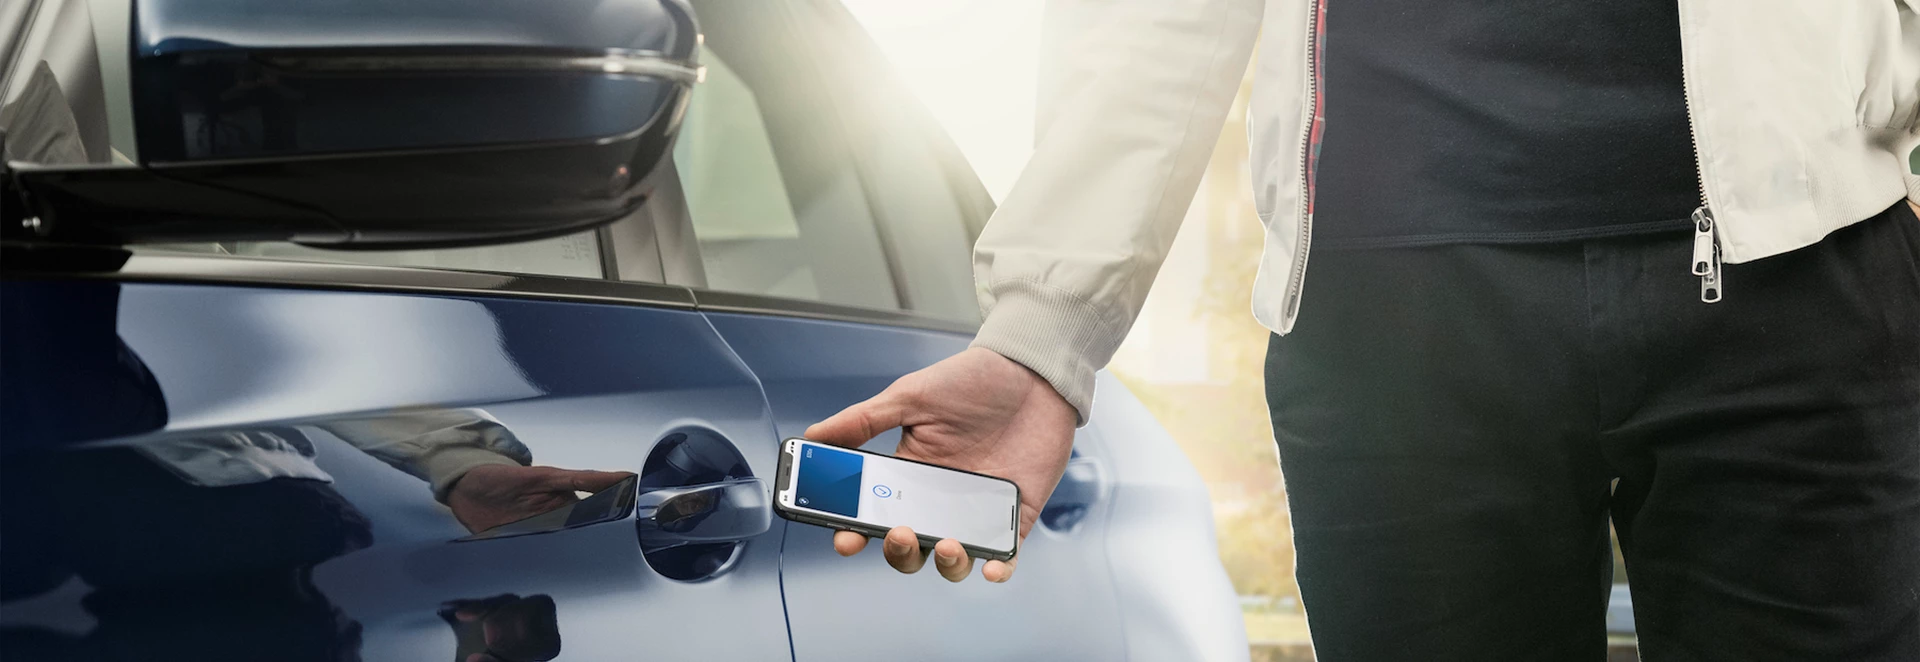 BMW becomes first firm to allow iPhones to unlock cars 